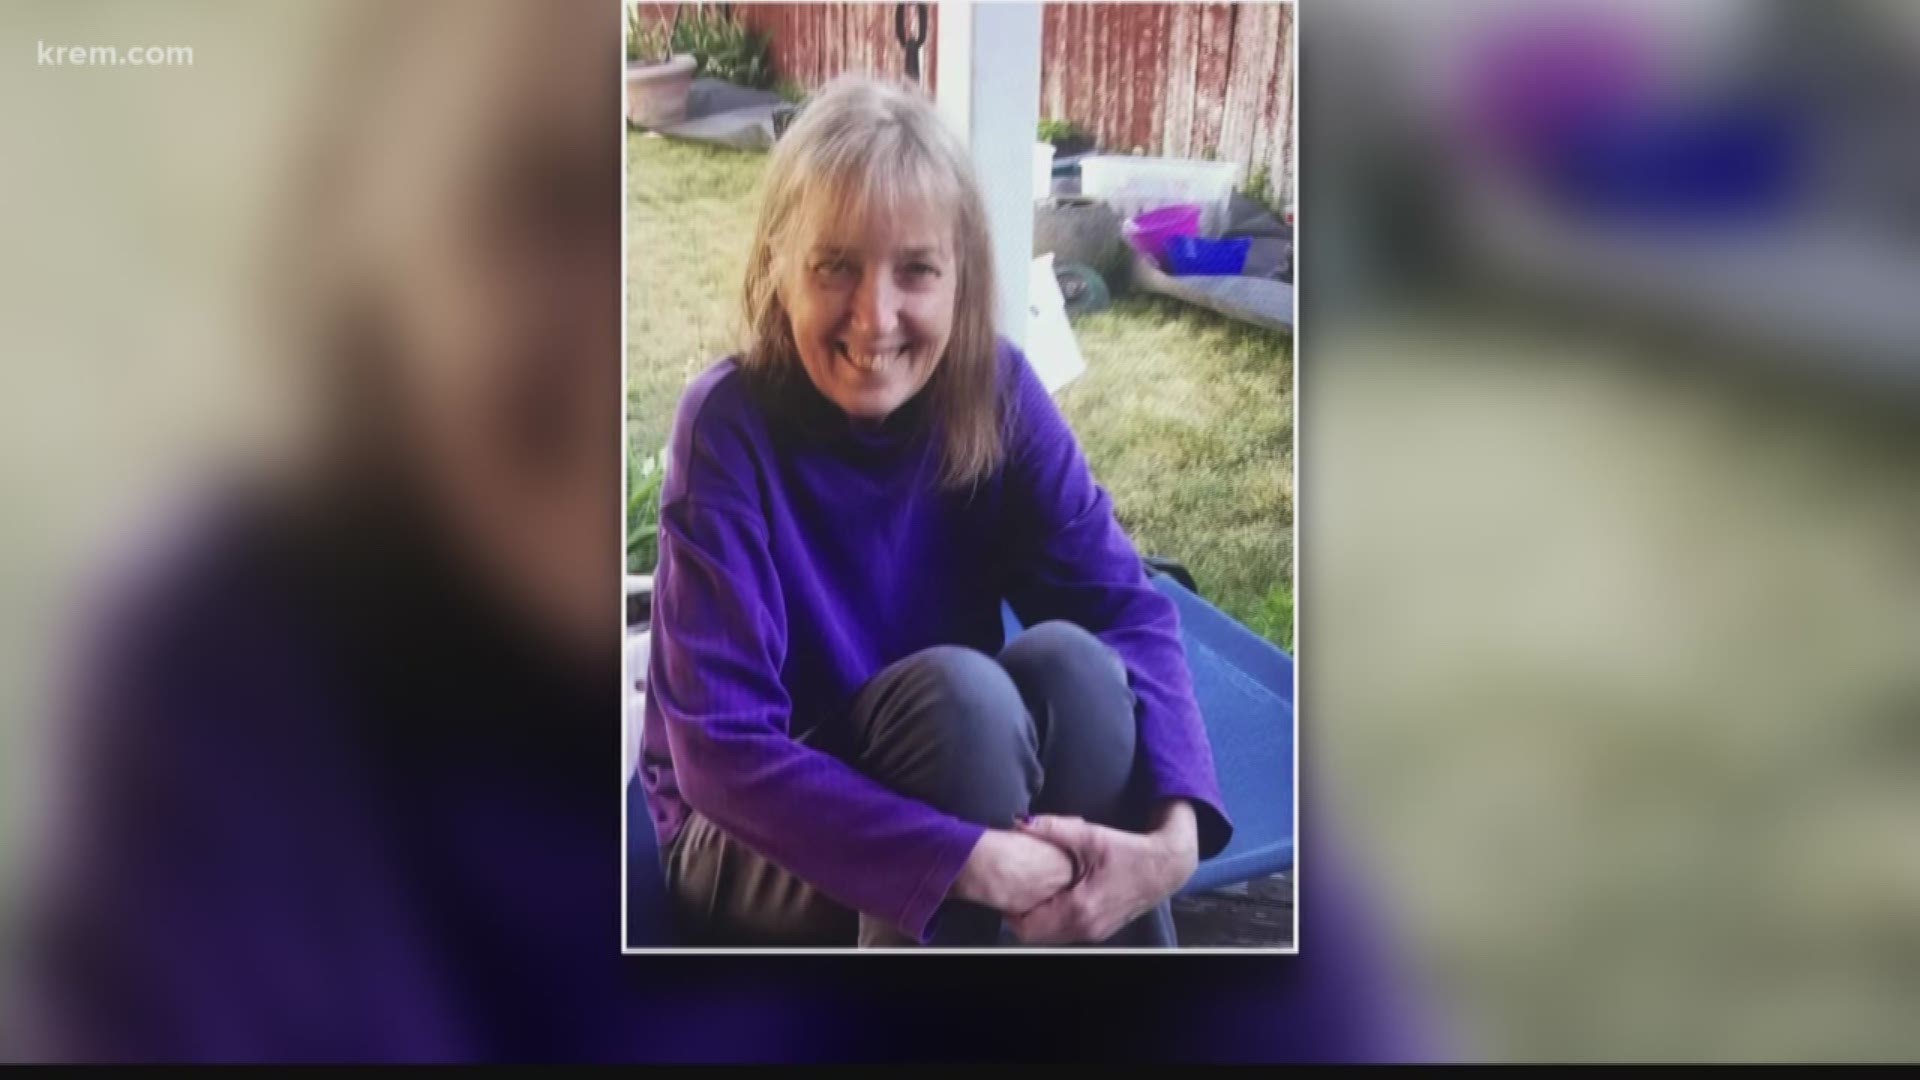 Spokane Police search for missing woman (6-19-18)